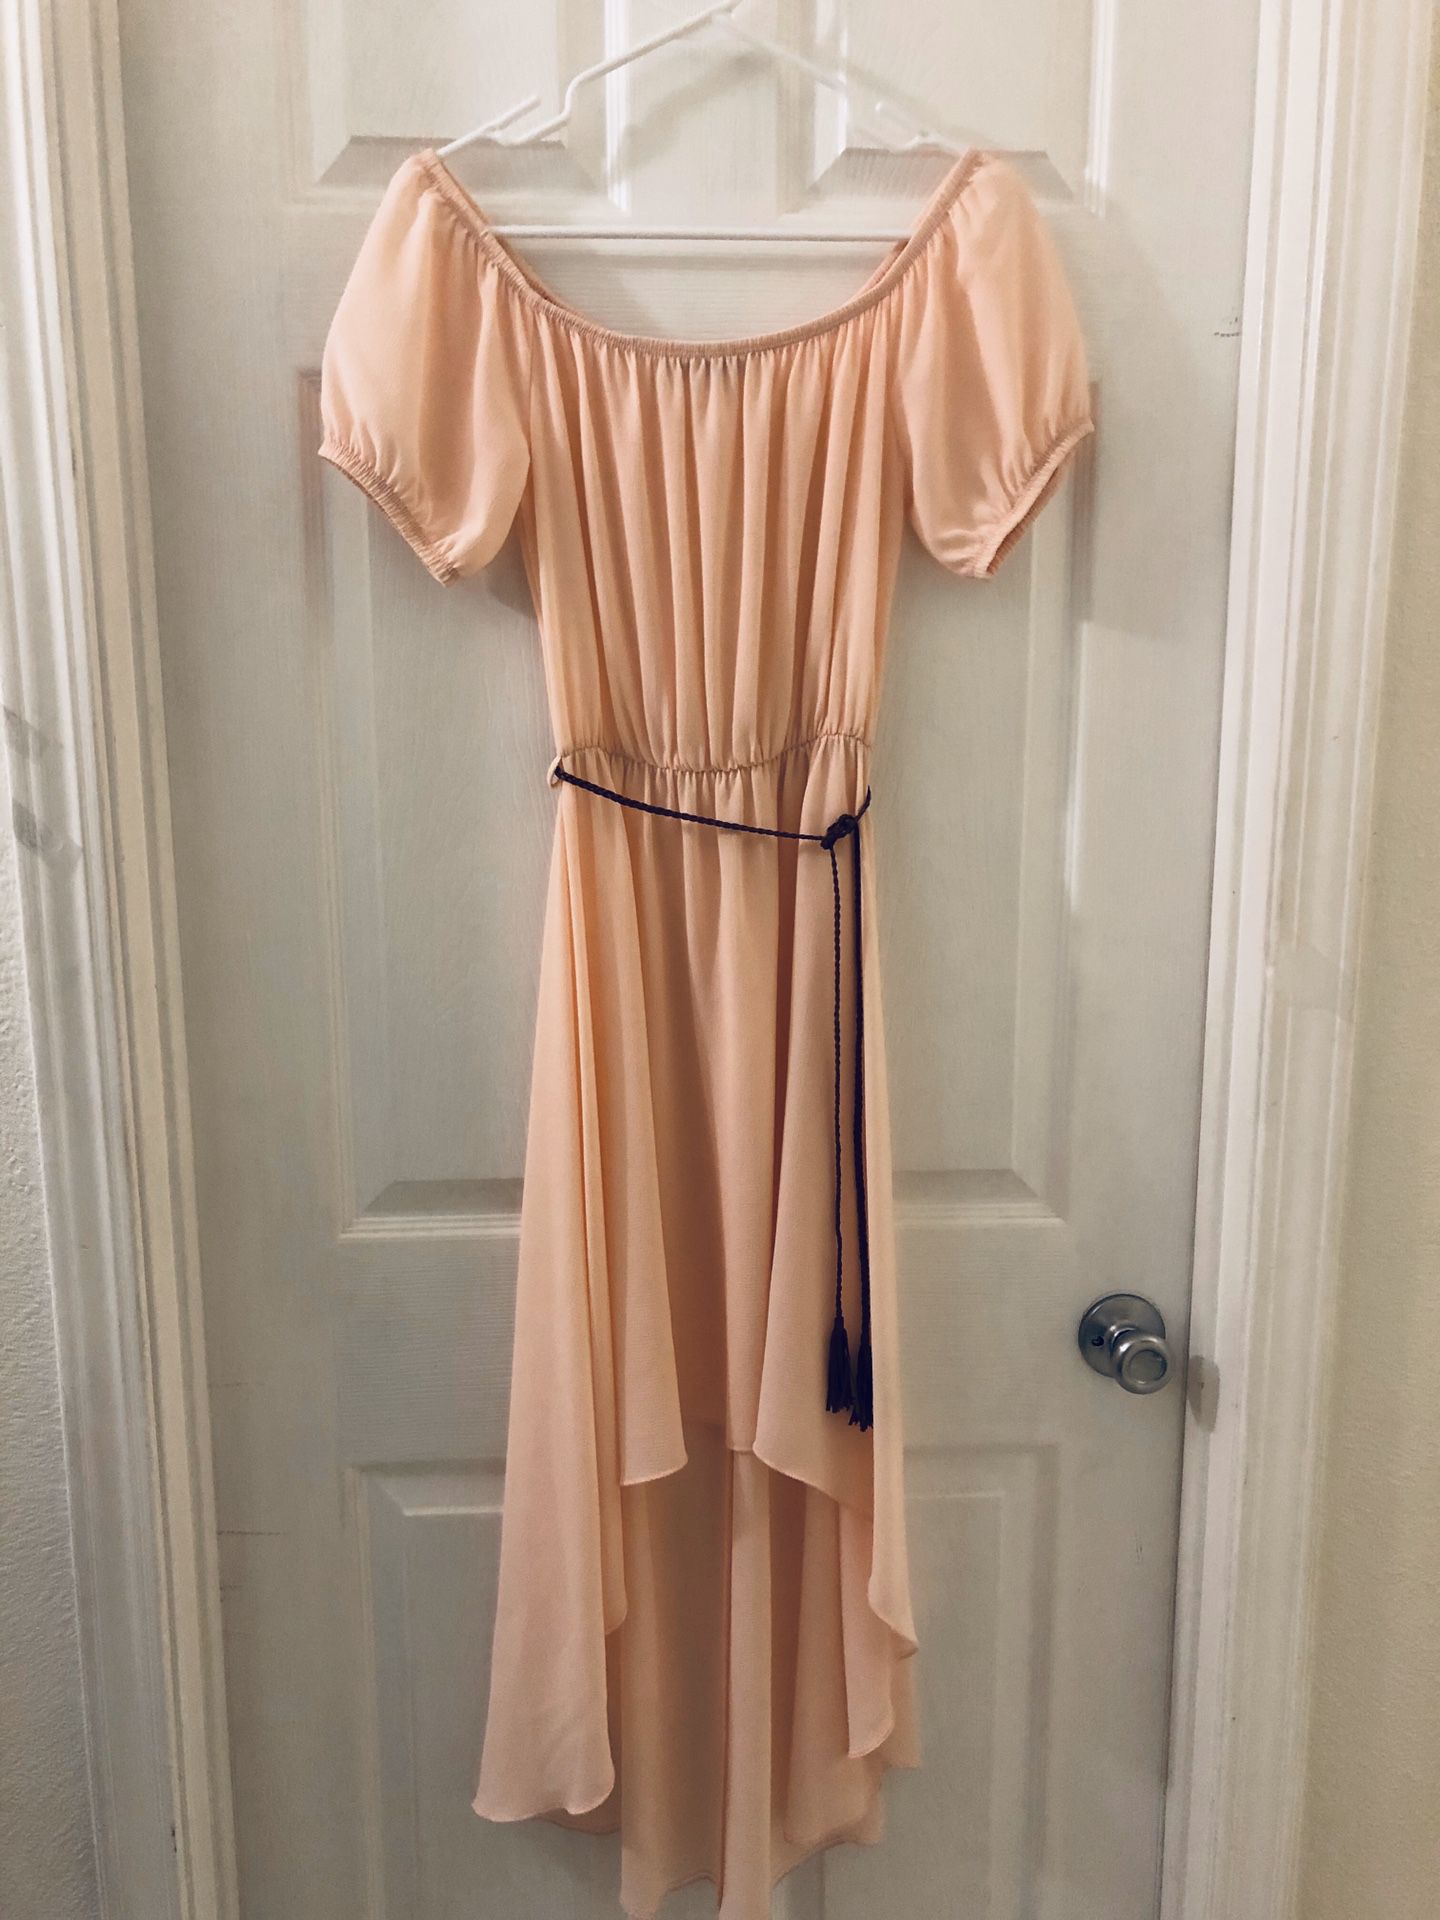 PEACH High-low off the shoulder dress